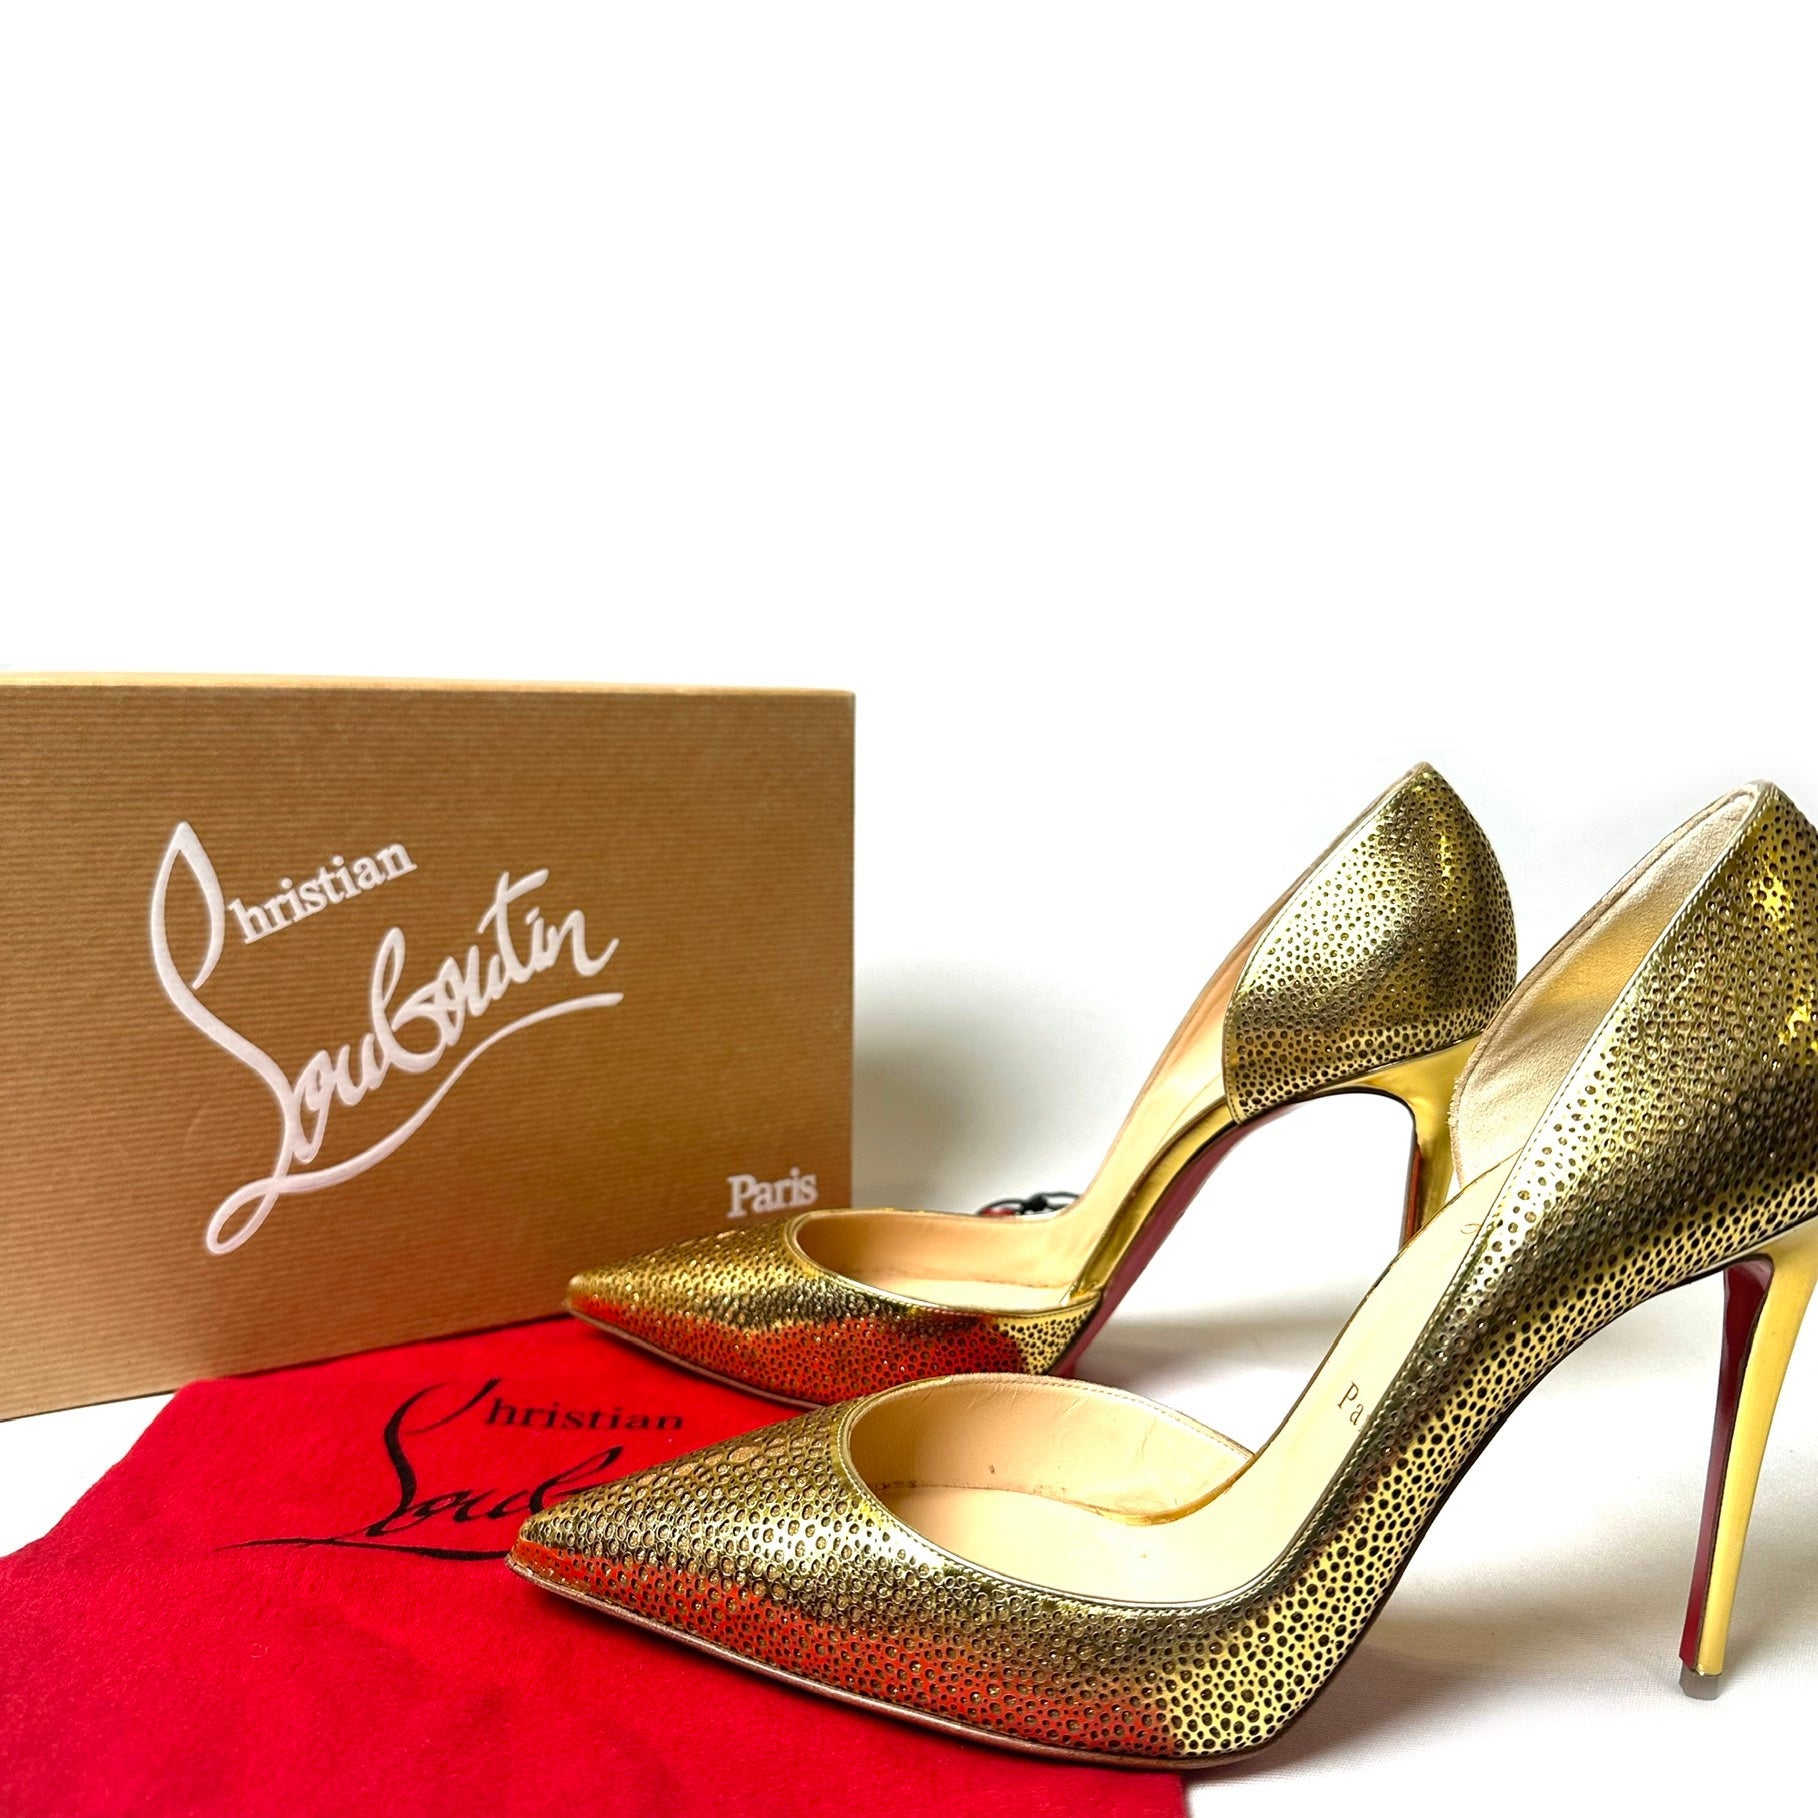 shoes louis vuitton high heels black red red high heels luxury brands  Louis  vuitton shoes heels, Christian louboutin shoes, Louis vuitton high heels